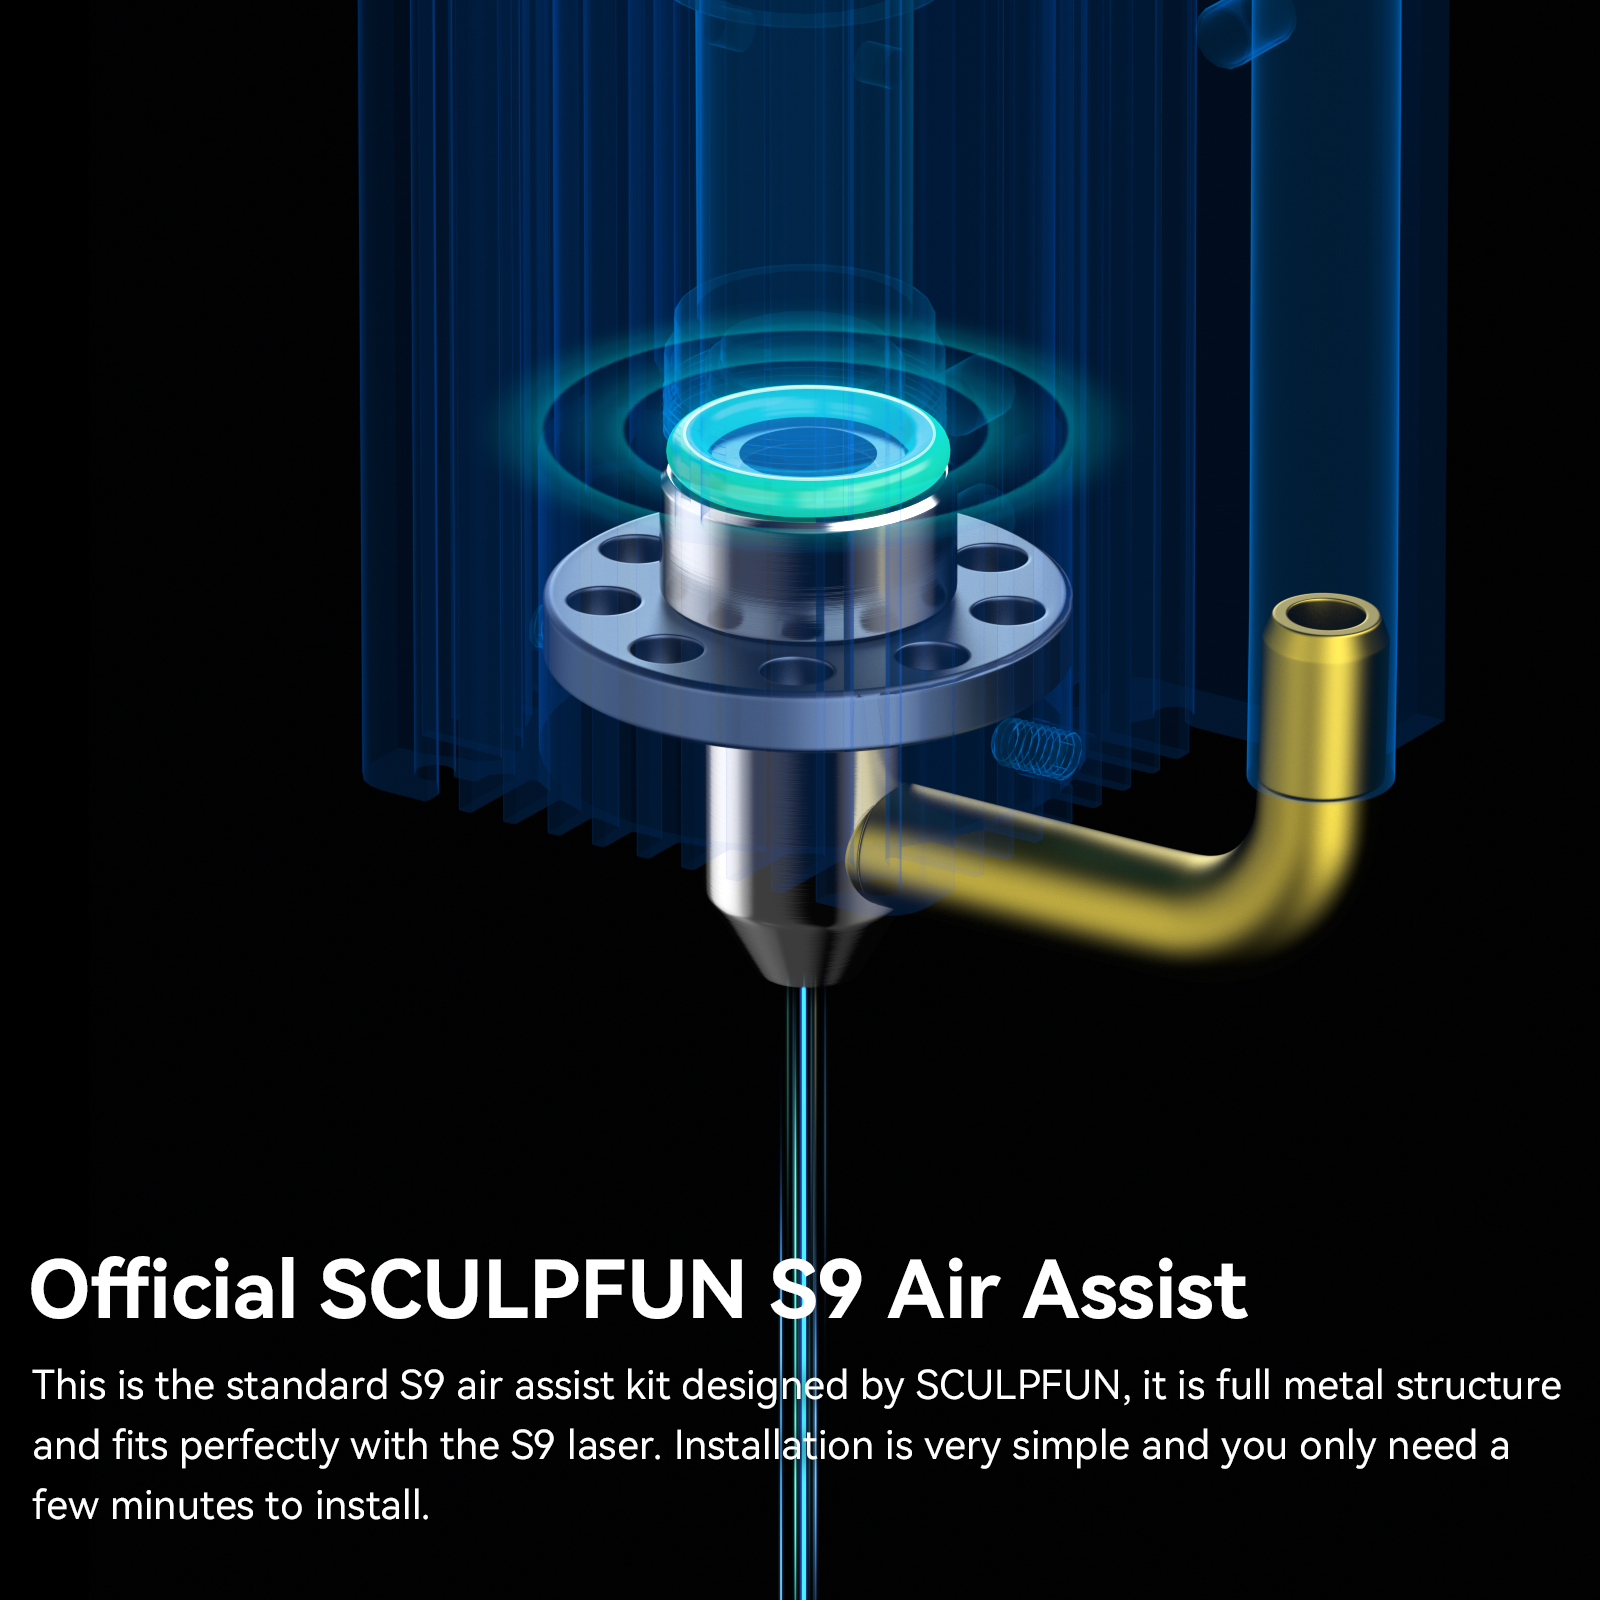 SCULPFUN S9 Air Assist Nozzle Kit with US Version 110V 30L/min Air Pump, Full Metal Structure Nozzle for S9 Lasers